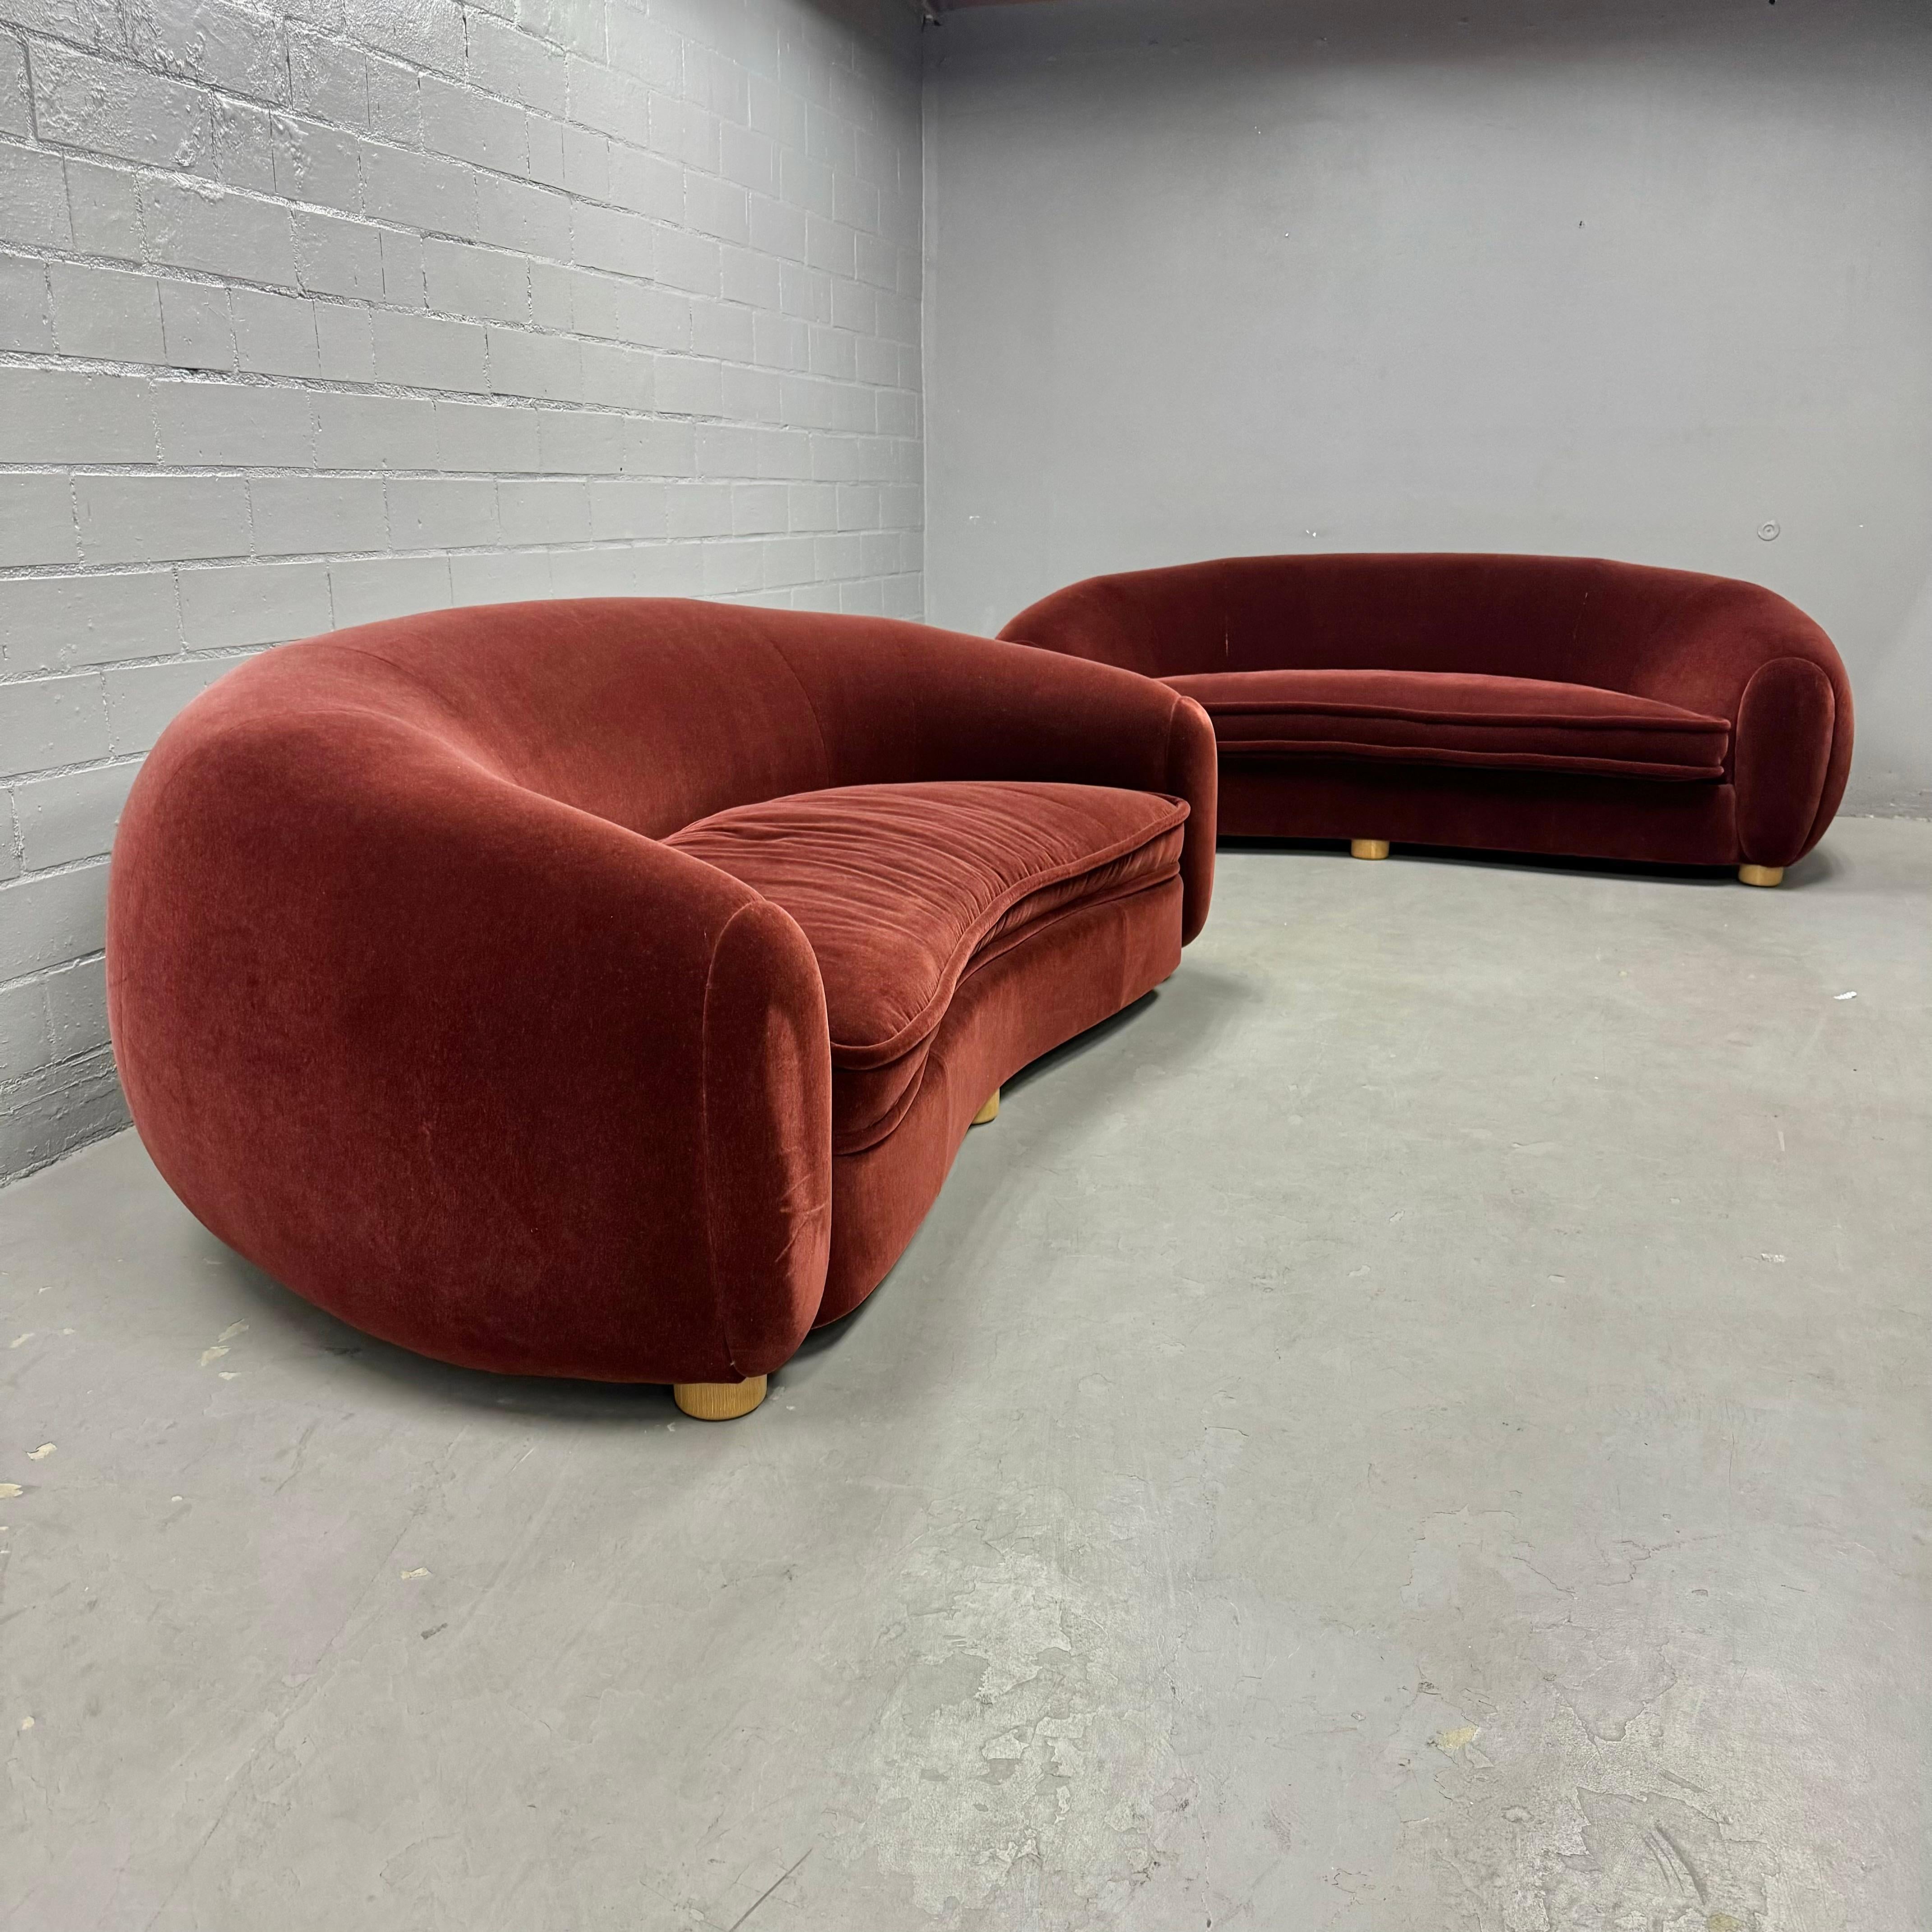 Extremely elegant and posh Art Deco inspired sofa in the style of the classic Jean Royère Polar Bear. Expertly upholstered by hand by the team at Jonas, New York. This sofa is completely upholstered in a deep maroon wool mohair. The cushions are